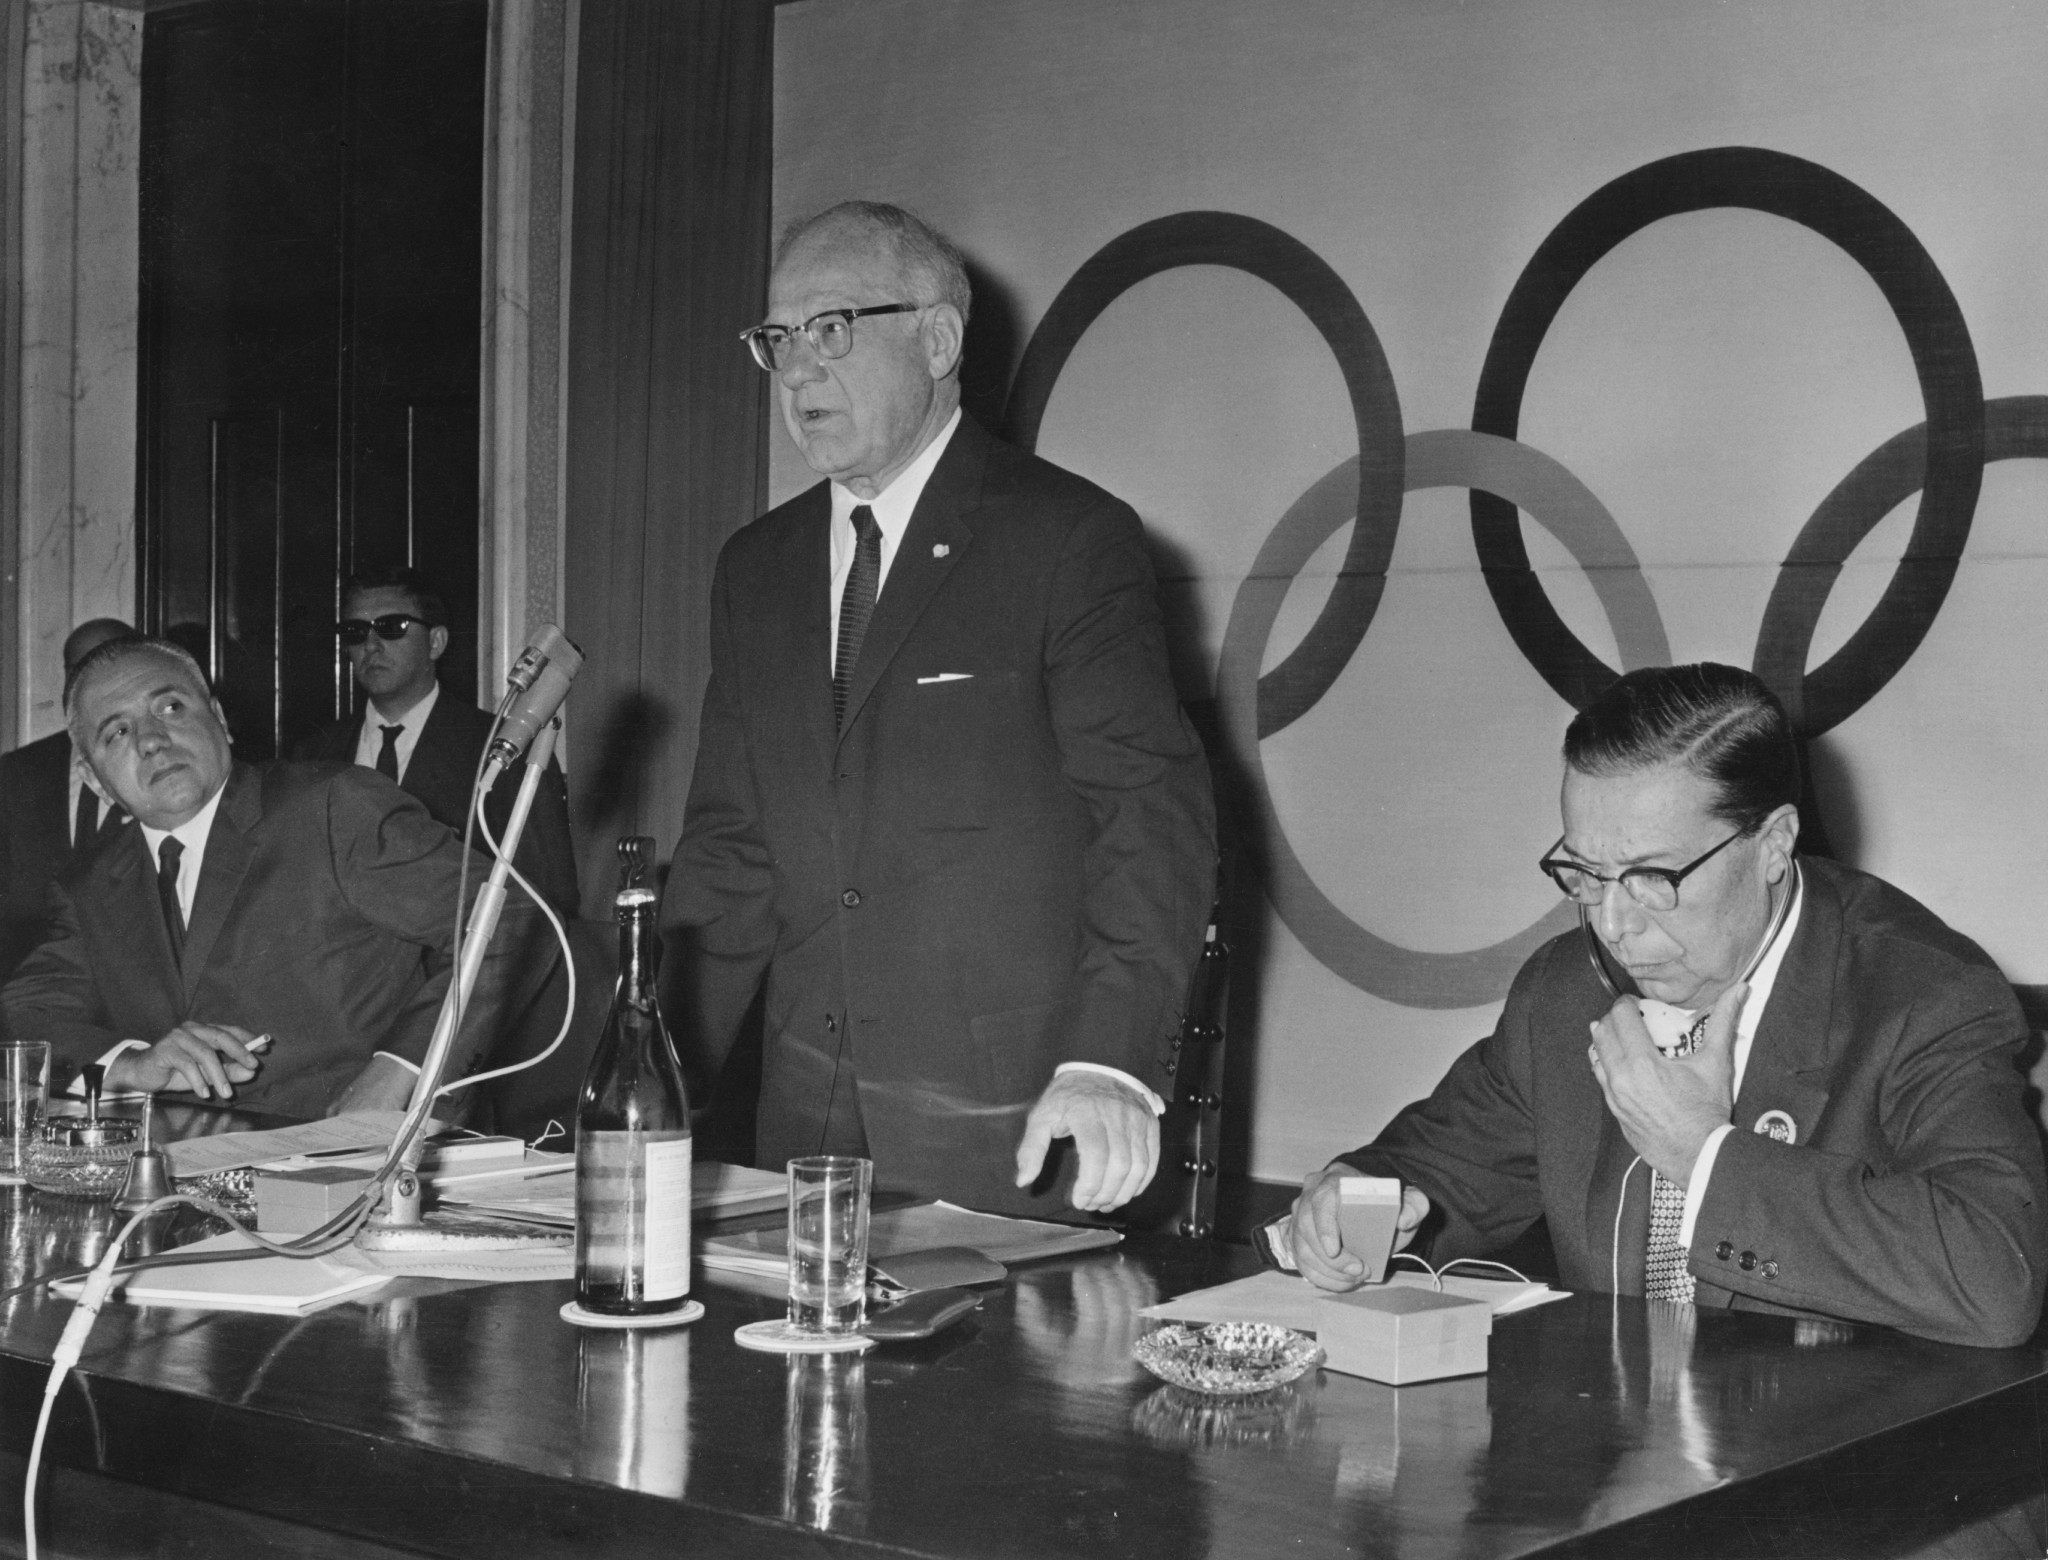 Avery Brundage (standing) was IOC President at the time that lifetime bans were issued to Matthews and Collett ©Getty Images